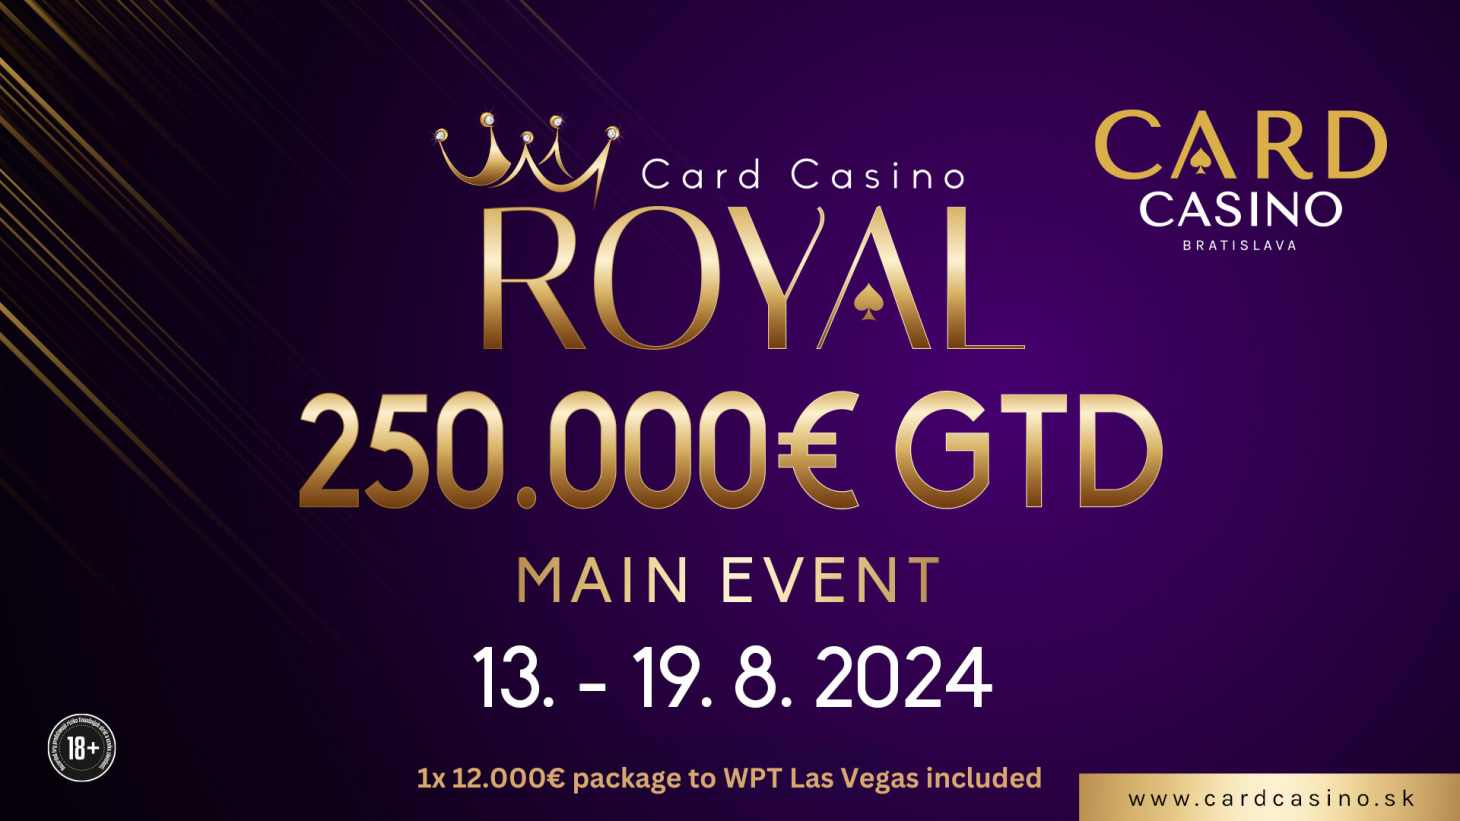 Hot summer, hot tournament. In August, the €250,000 GTD Royal is played